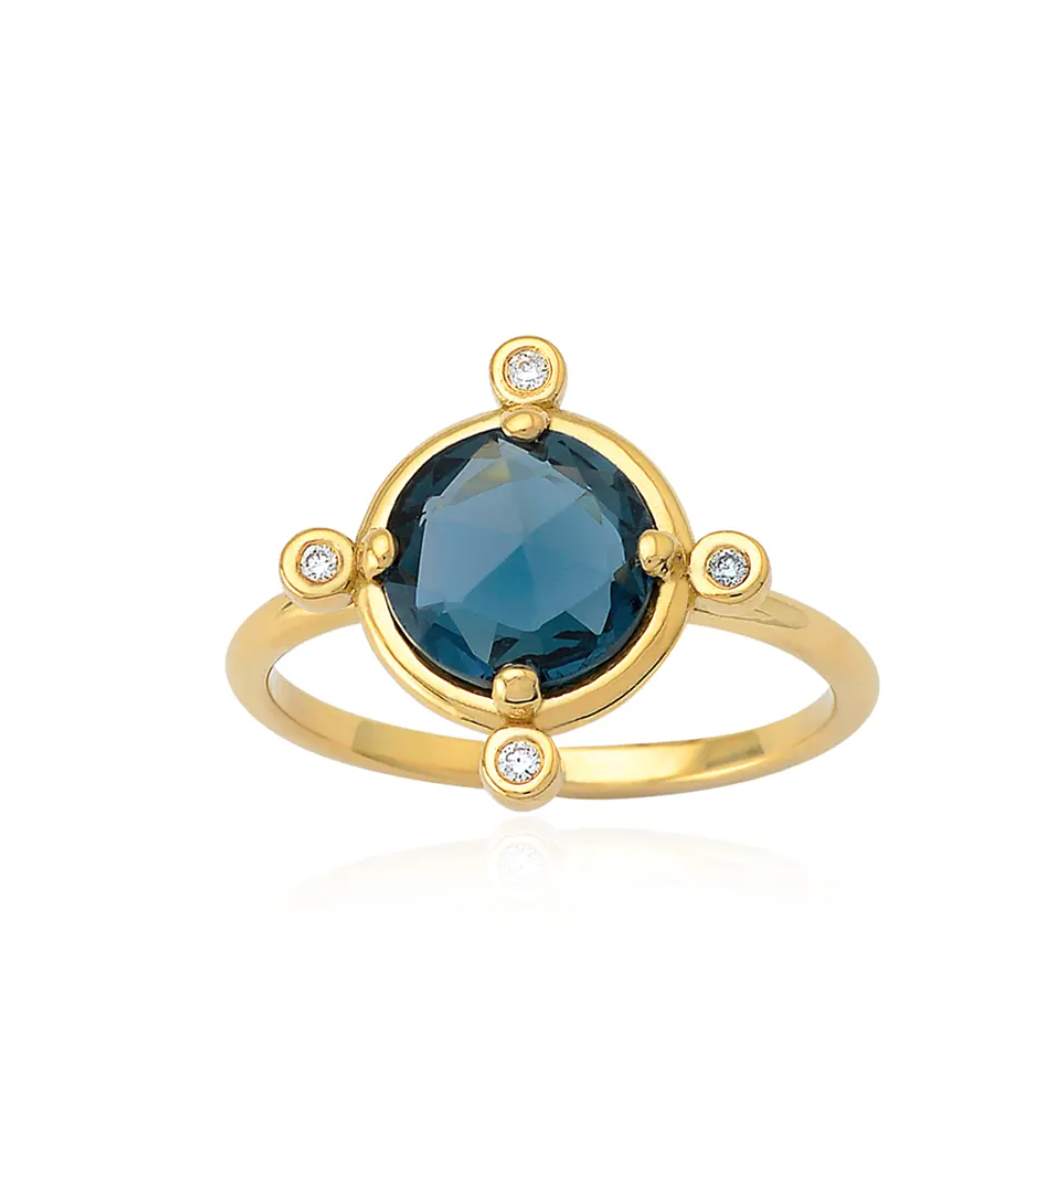 Round Shaped London Blue Topaz 18K Gold Ring with Diamonds